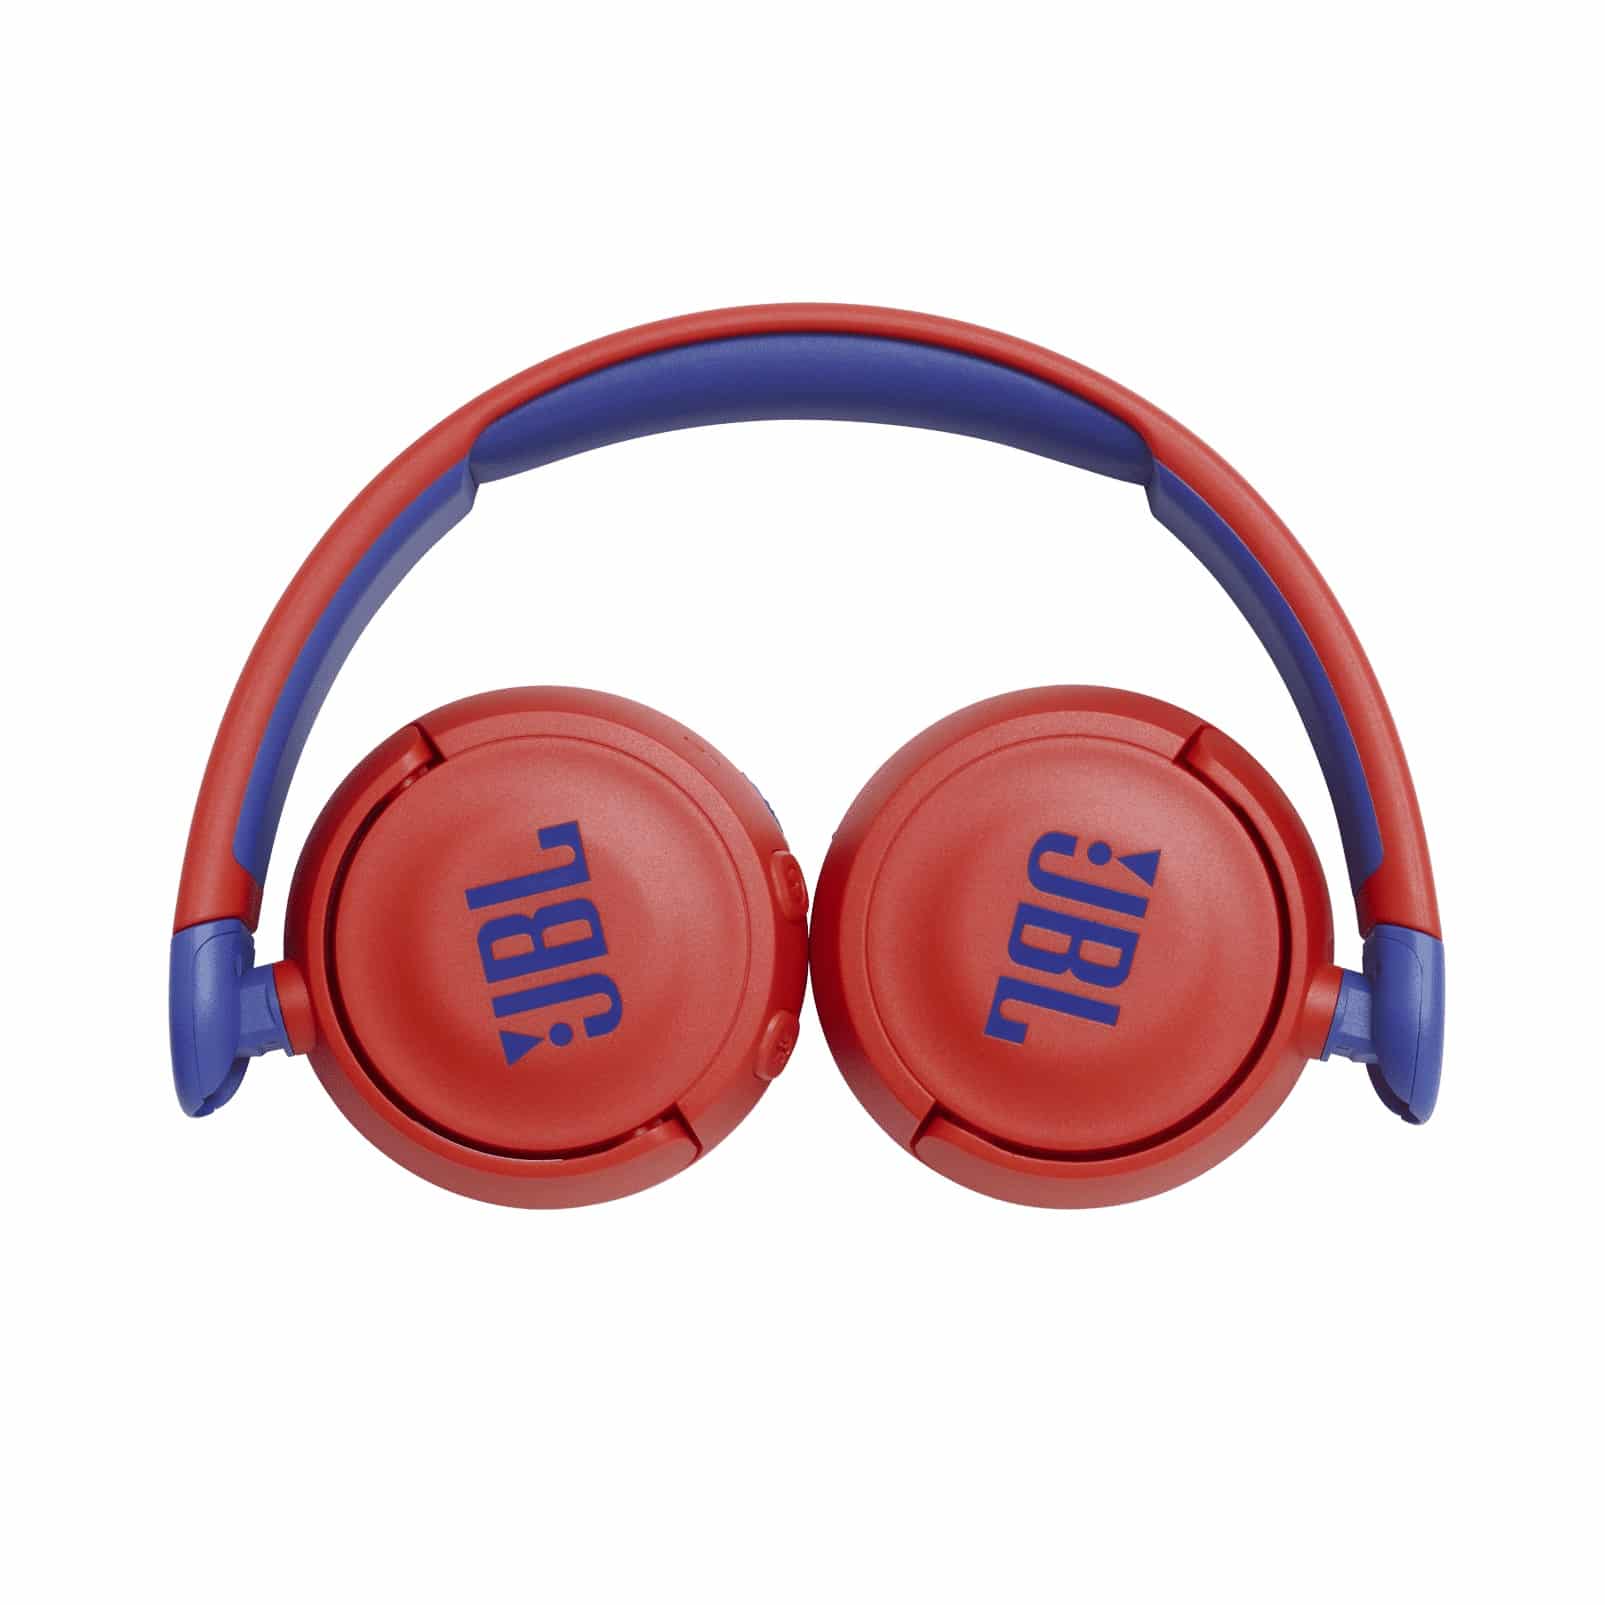 JBL Headphones with Bluetooth for Kids in red